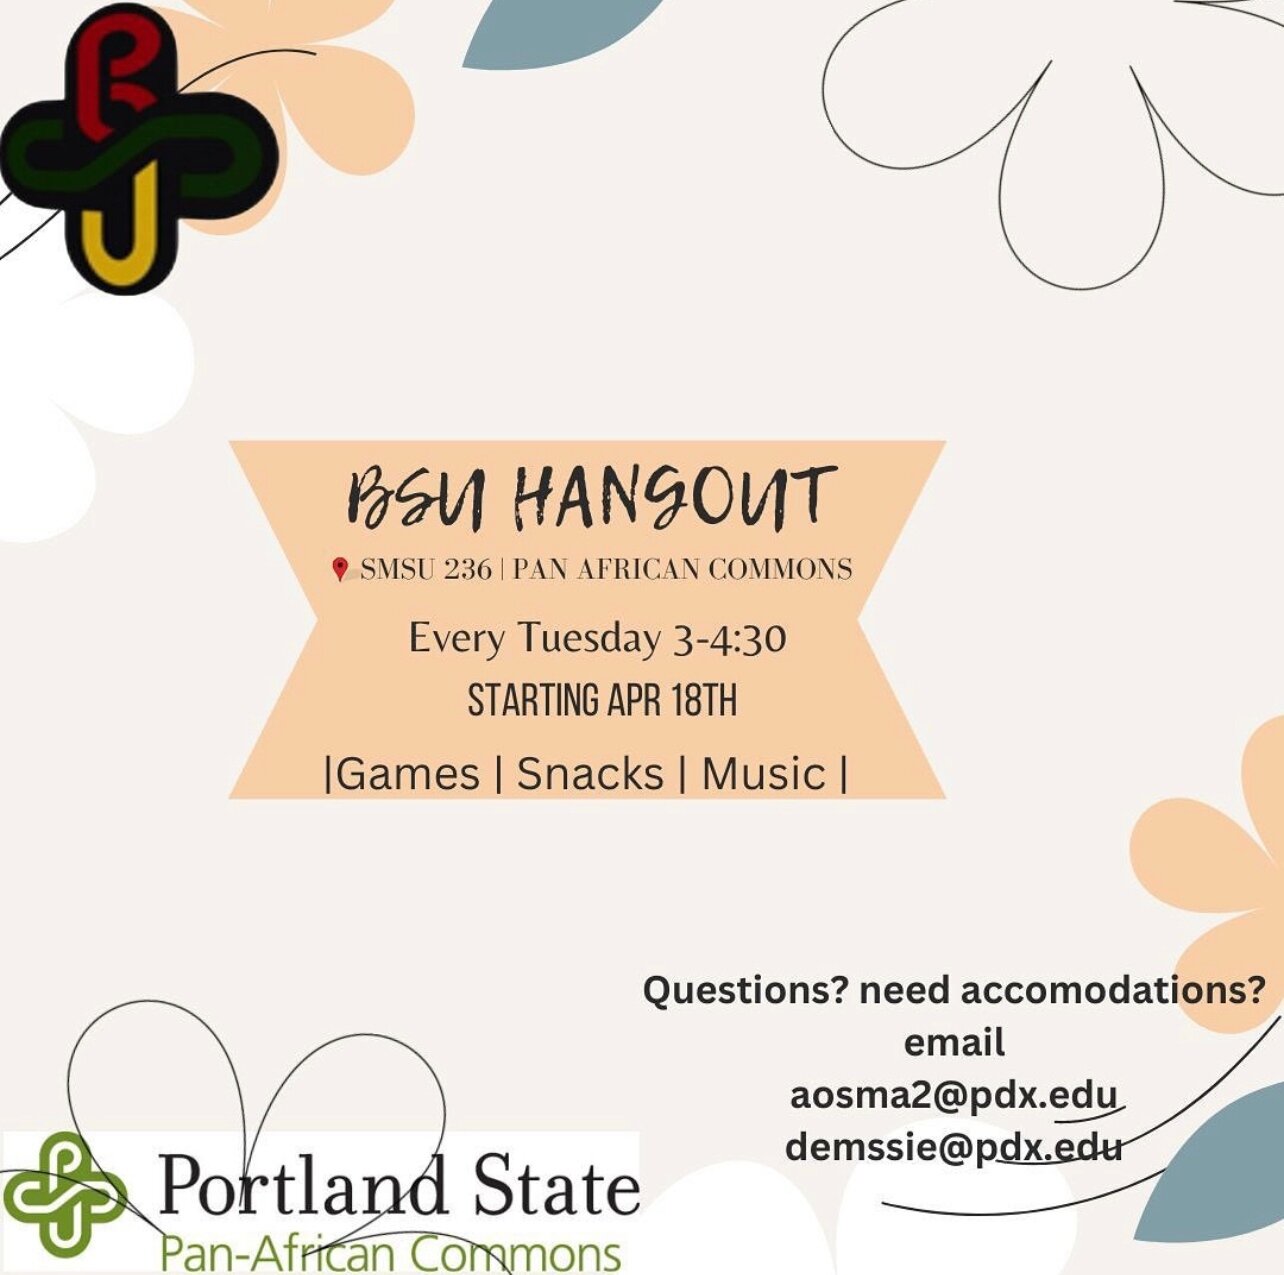 Tuesday! 5/2
@bsupdx

&ldquo;Hello BSU family It will be at the Pan African Commons (SMSU 236) every Tuesday from 3:00-4:30 pm. There will be amazing music, snacks, and great people. This is a great chance to meet new people on campus, meet your BSU 